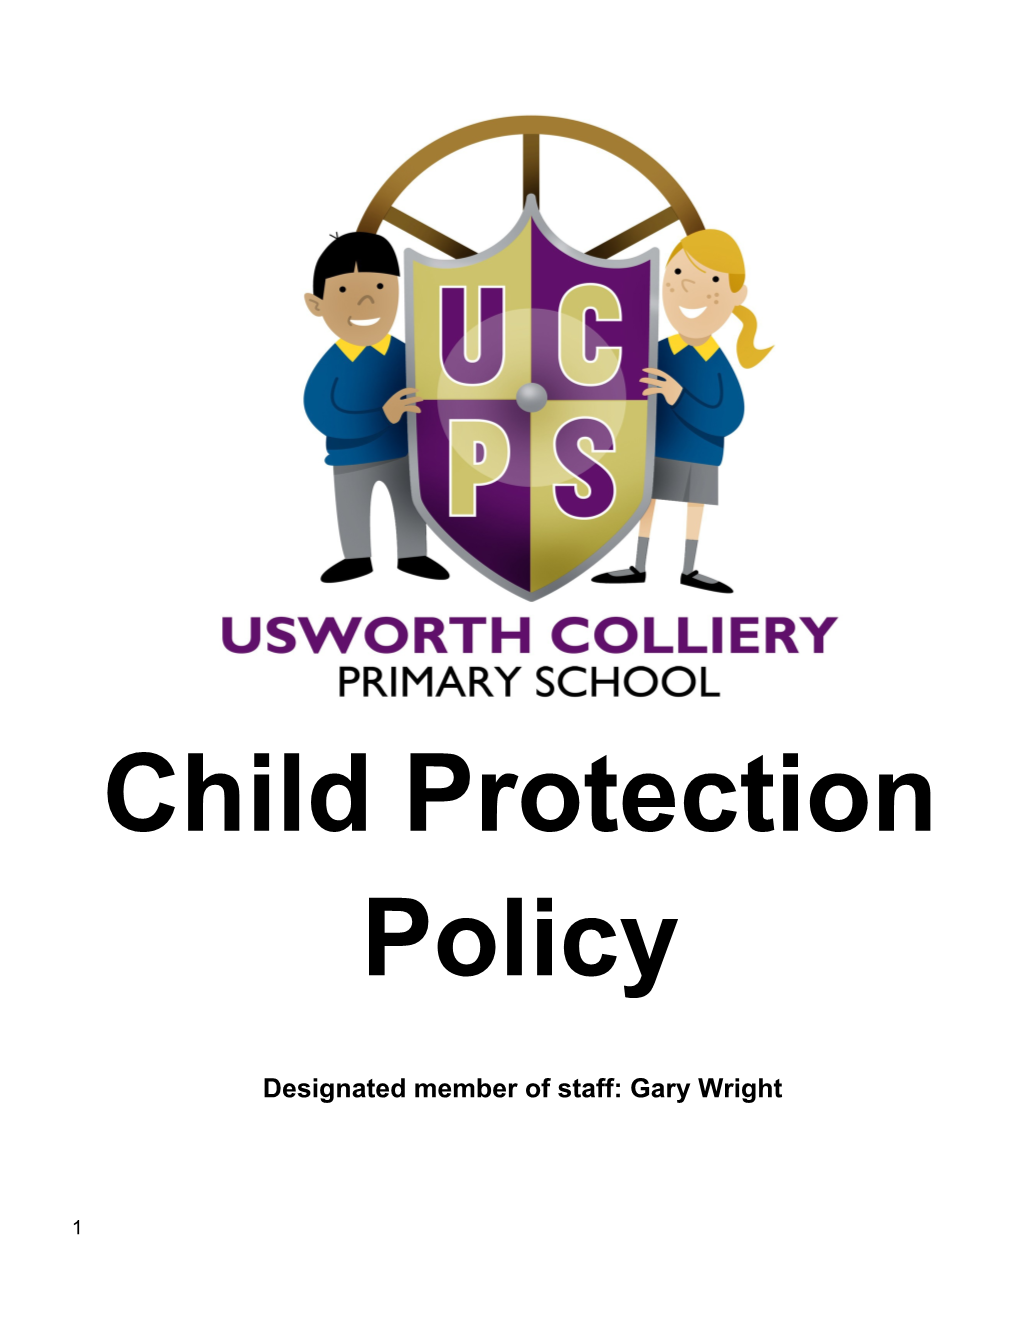 The School S Arrival and Departure Policy Is Part of the School S Policies for Safeguarding